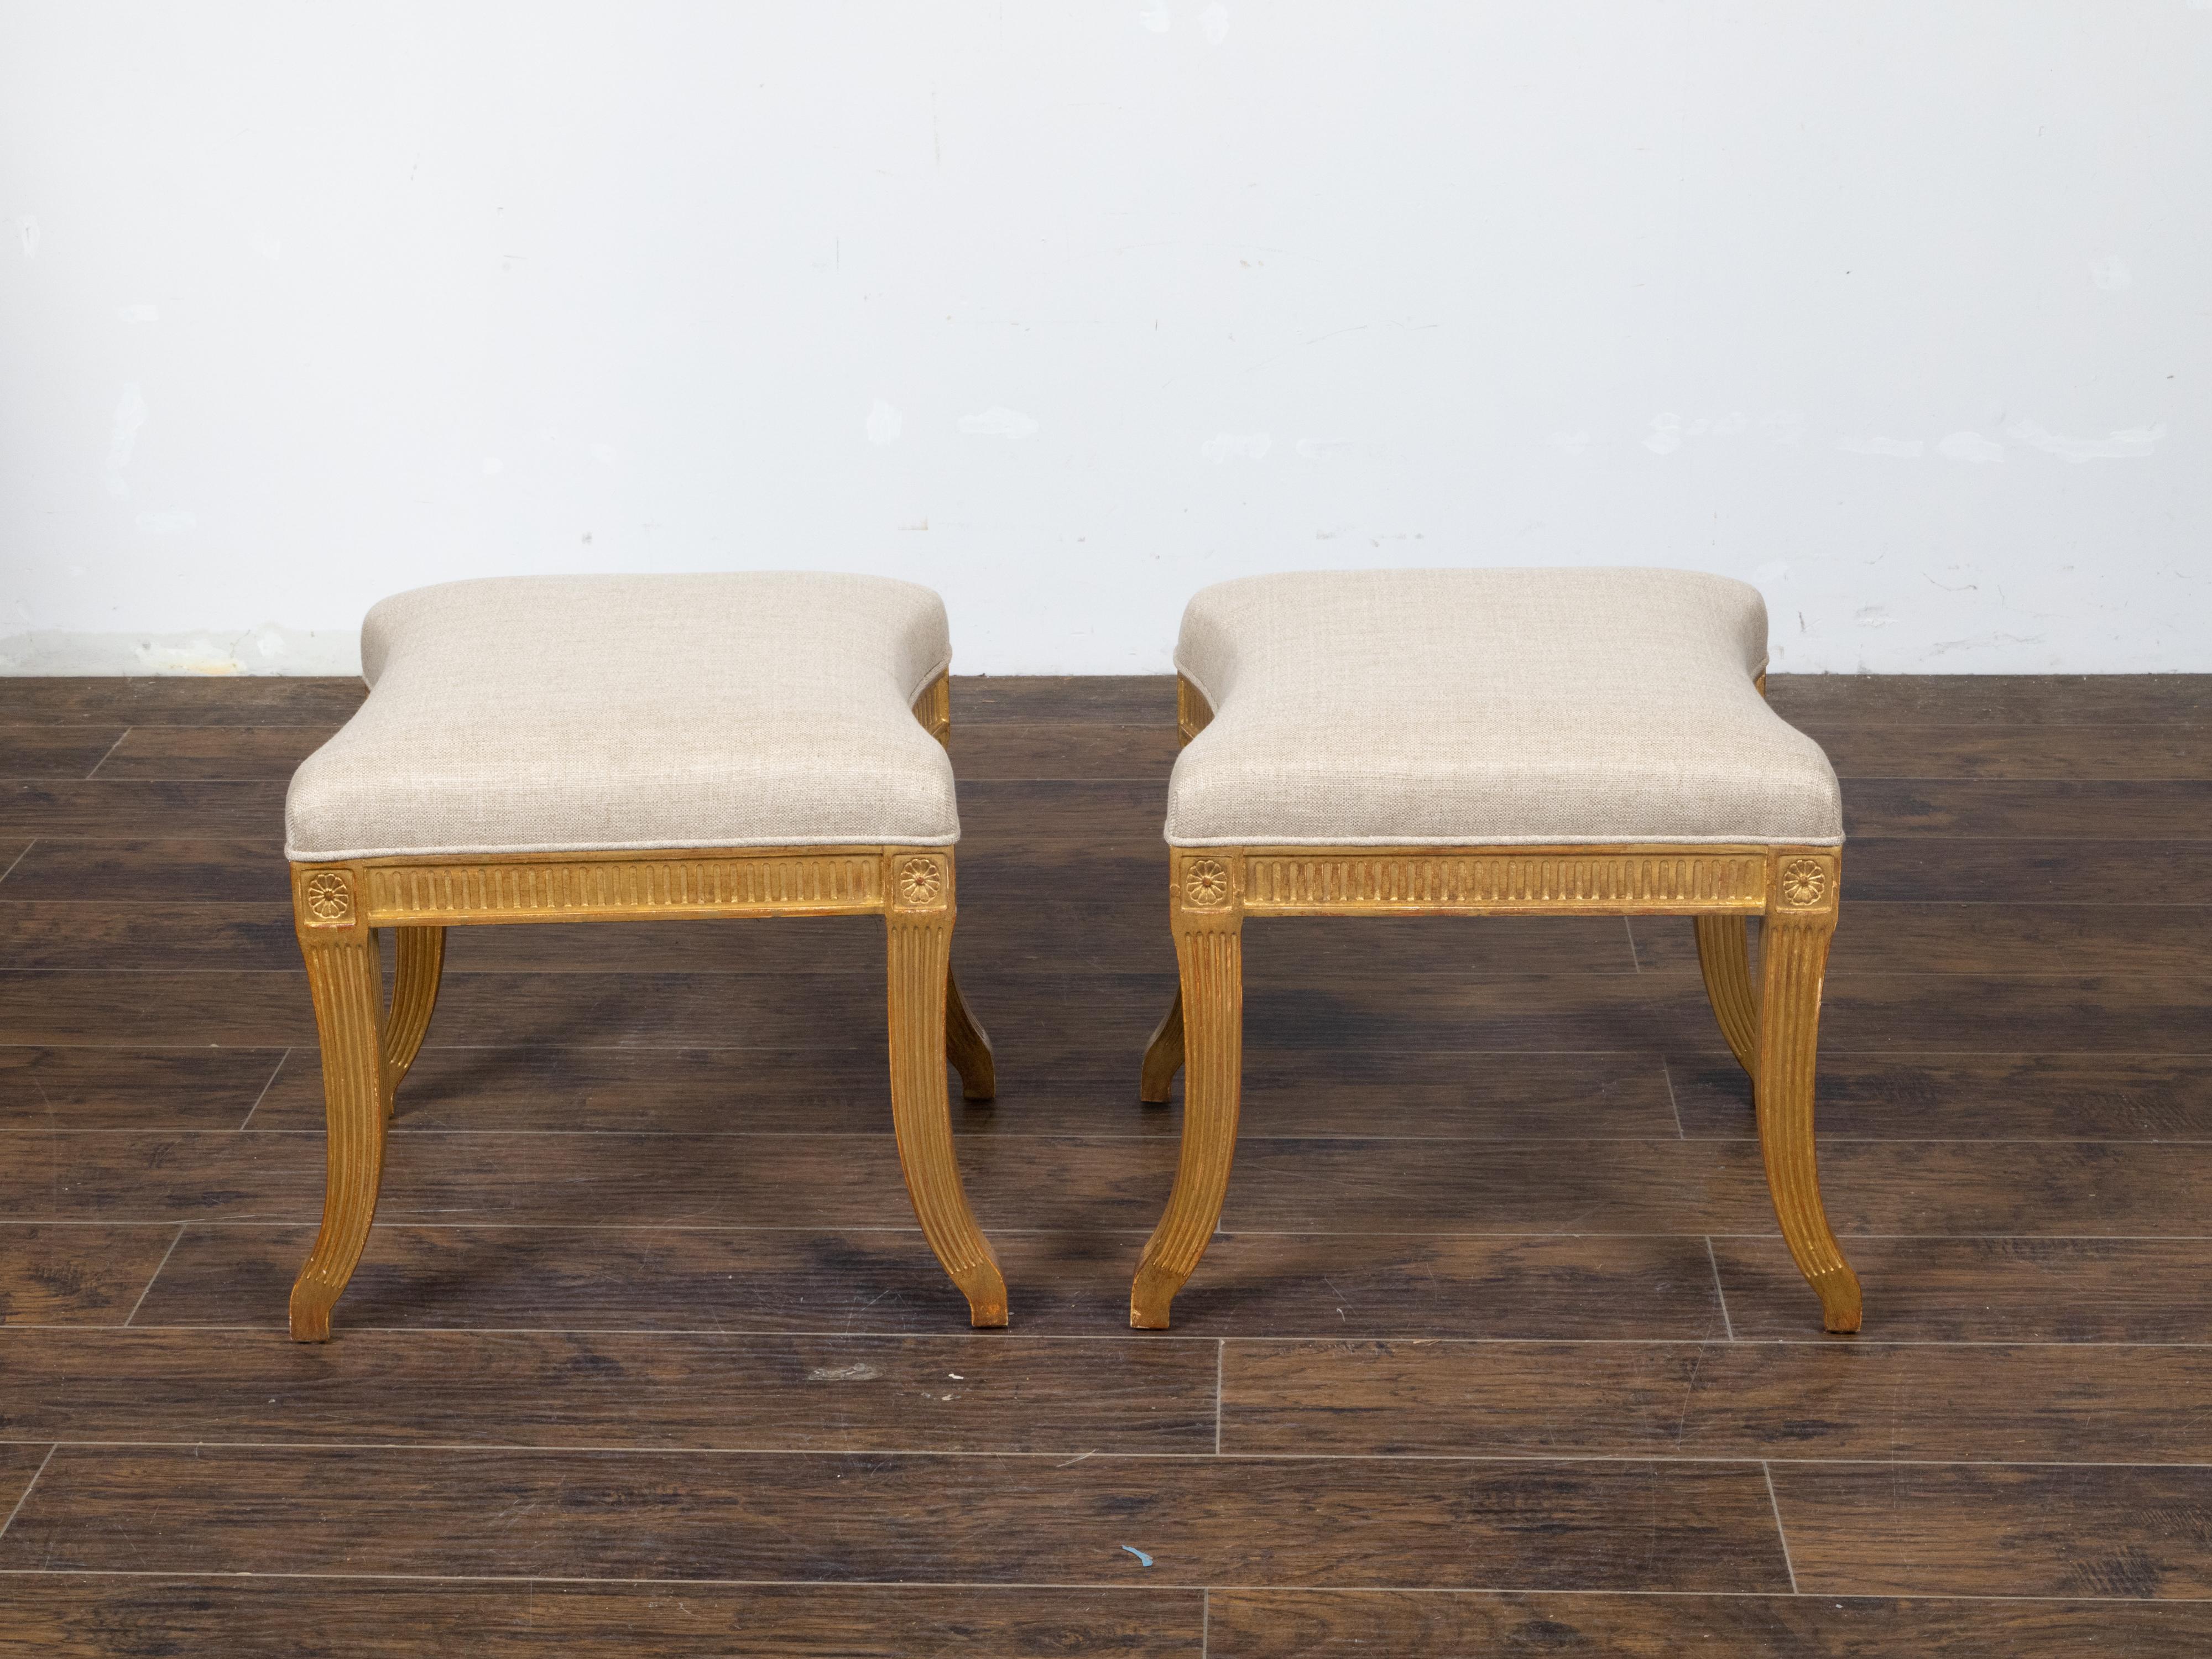 Pair of French Directoire Style Midcentury Giltwood Stools with New Upholstery For Sale 1